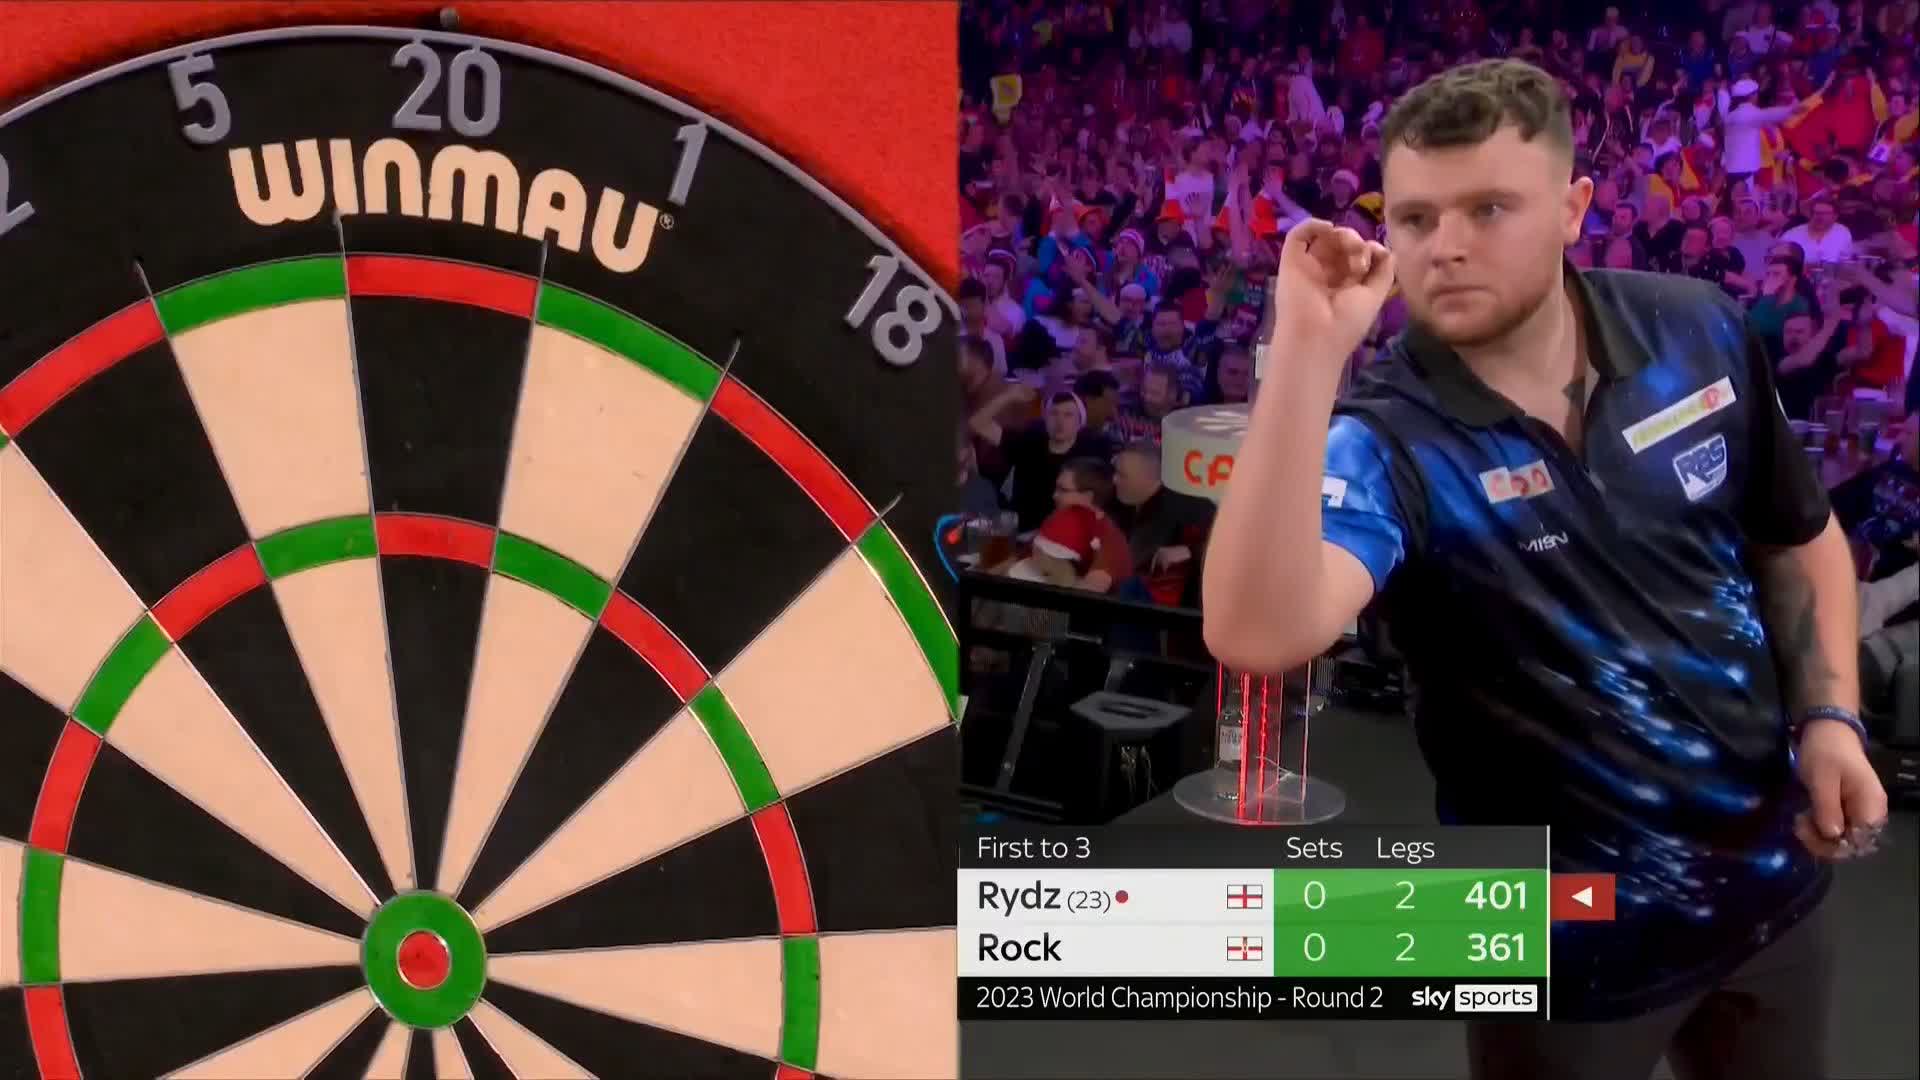 PDC Darts on Twitter: "ROCKING THE ALLY CROWD! This match is QUICK! 💨 Josh Rock takes the opening set in a deciding leg and that could be MASSIVE! #WCDarts | R2